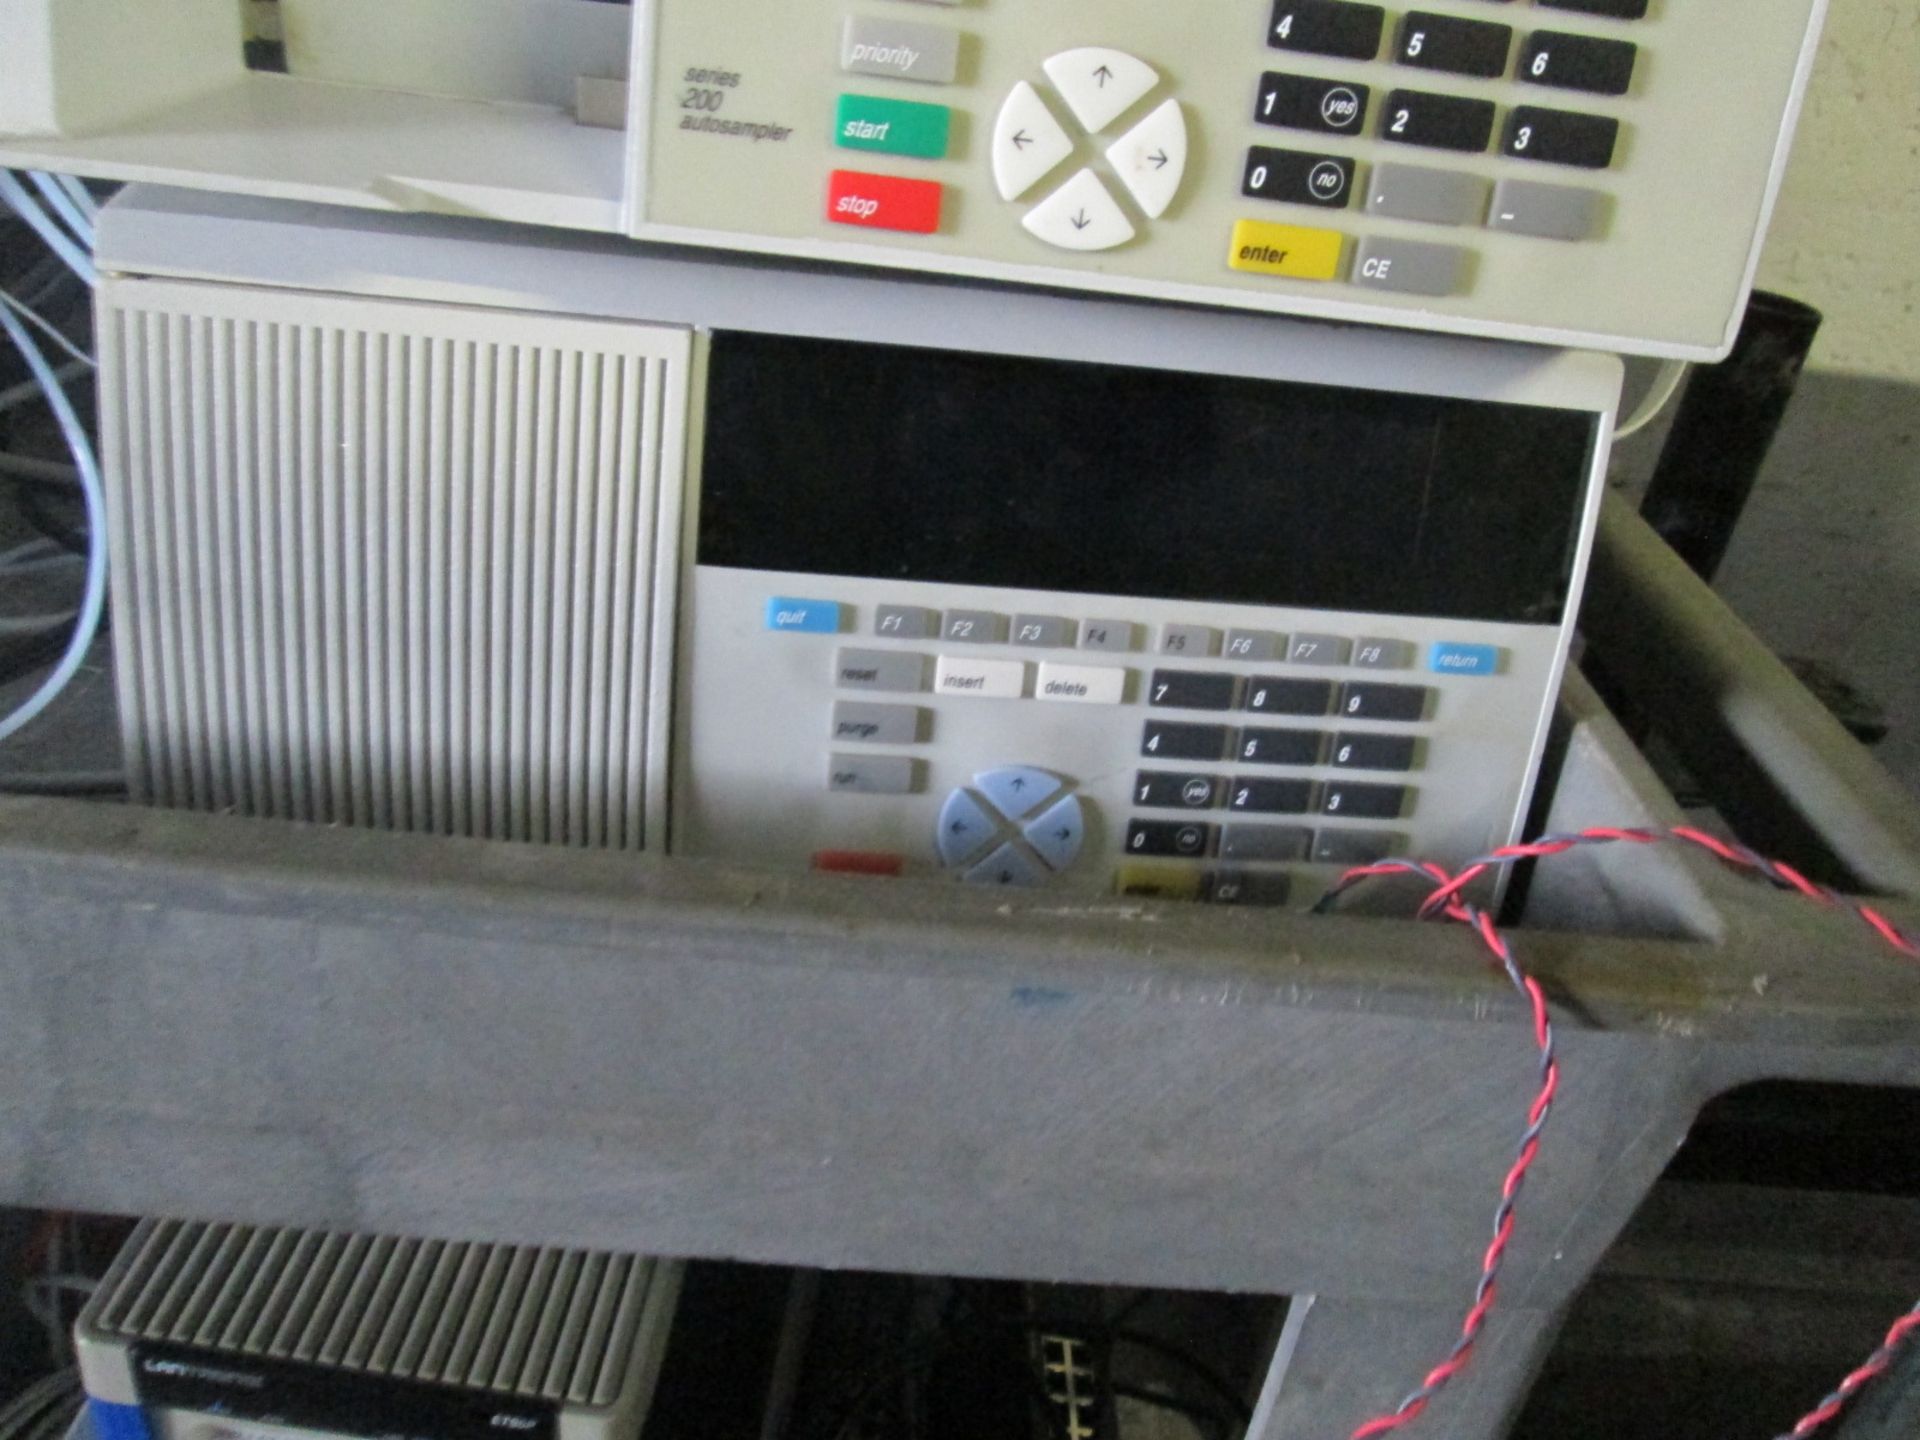 HPLC System / Applied Bio Systems Absorbance Detector / AutoSampler / Pumps / IT Gear etc. - Image 15 of 18